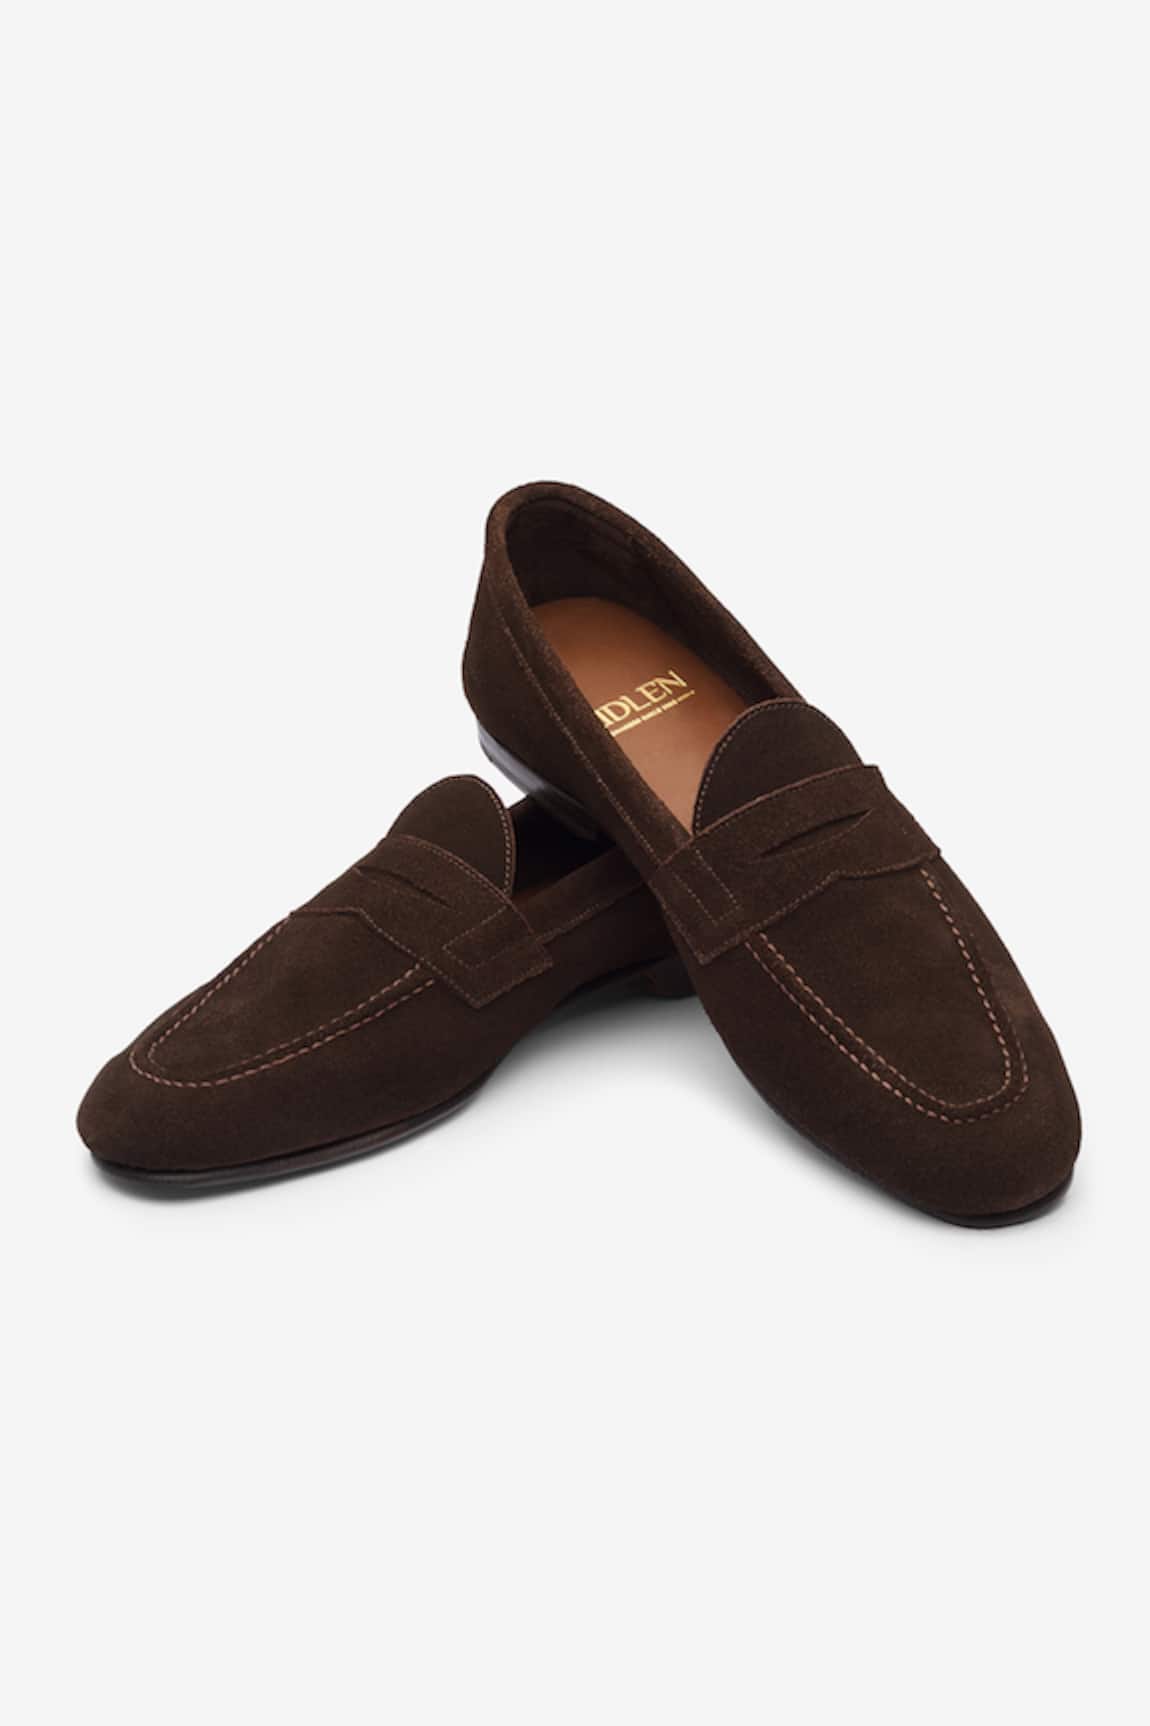 Bridlen Suede Penny Loafers